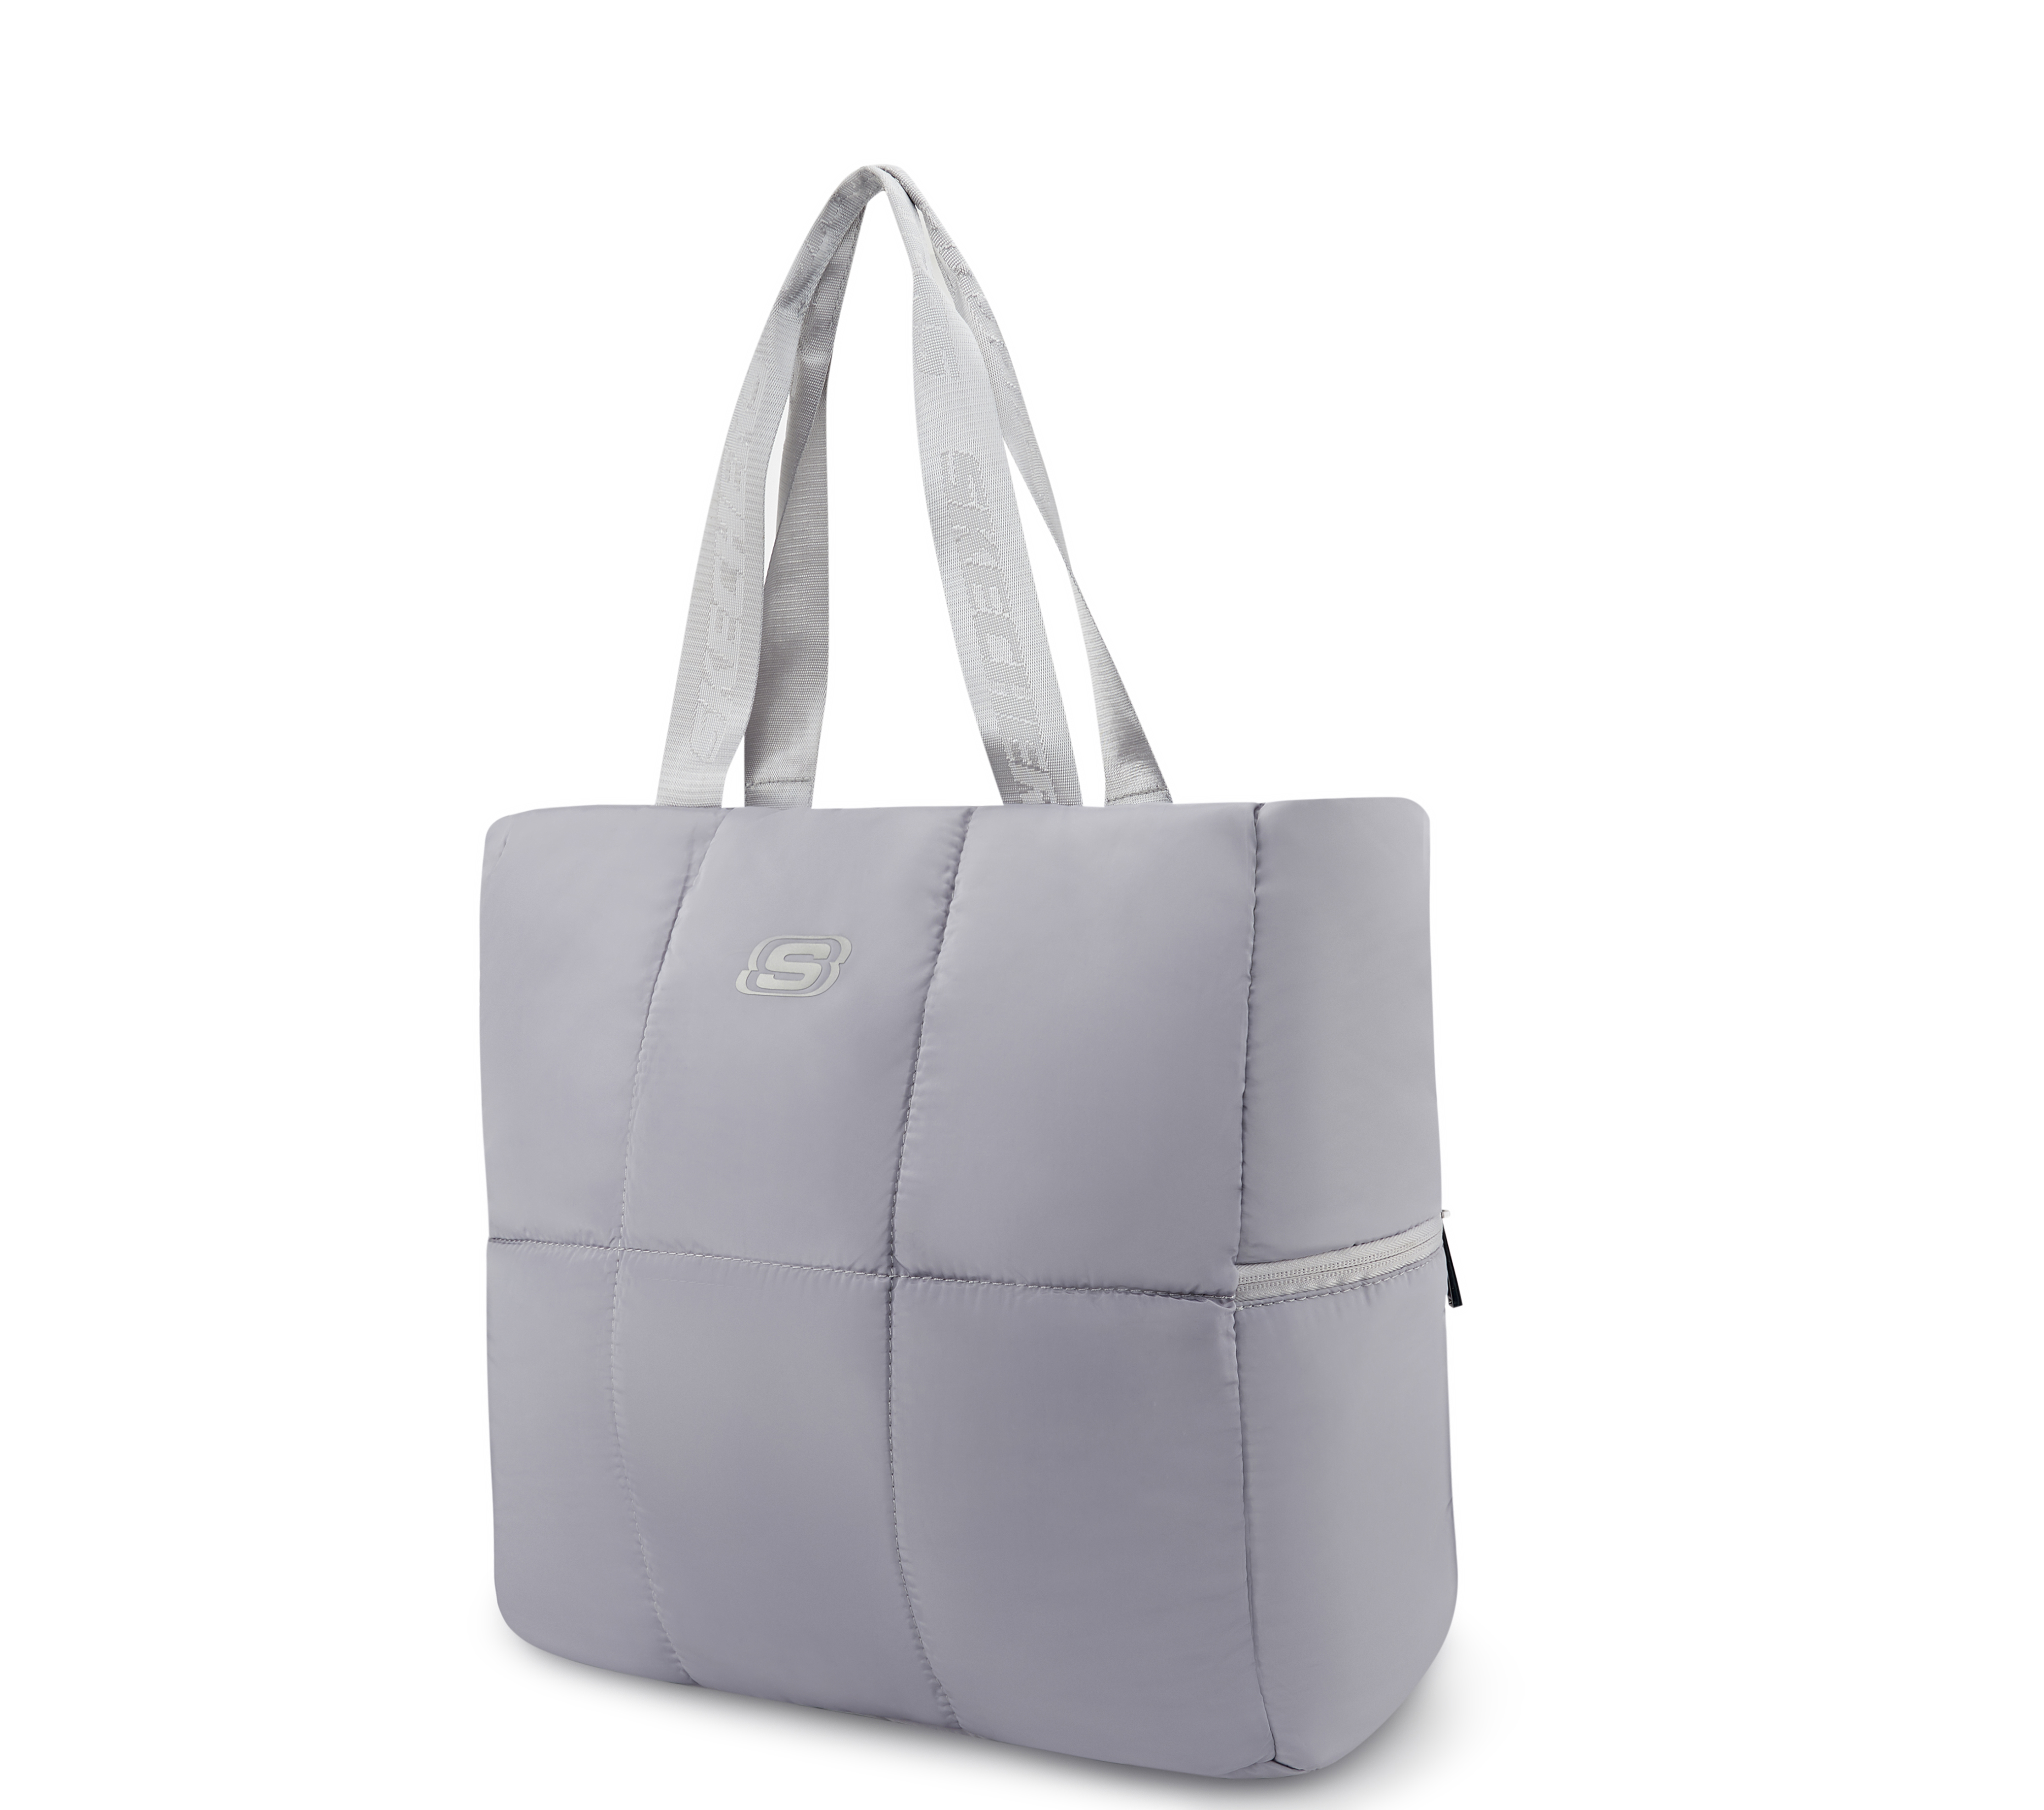 TOTE, GREY Accessories Top View